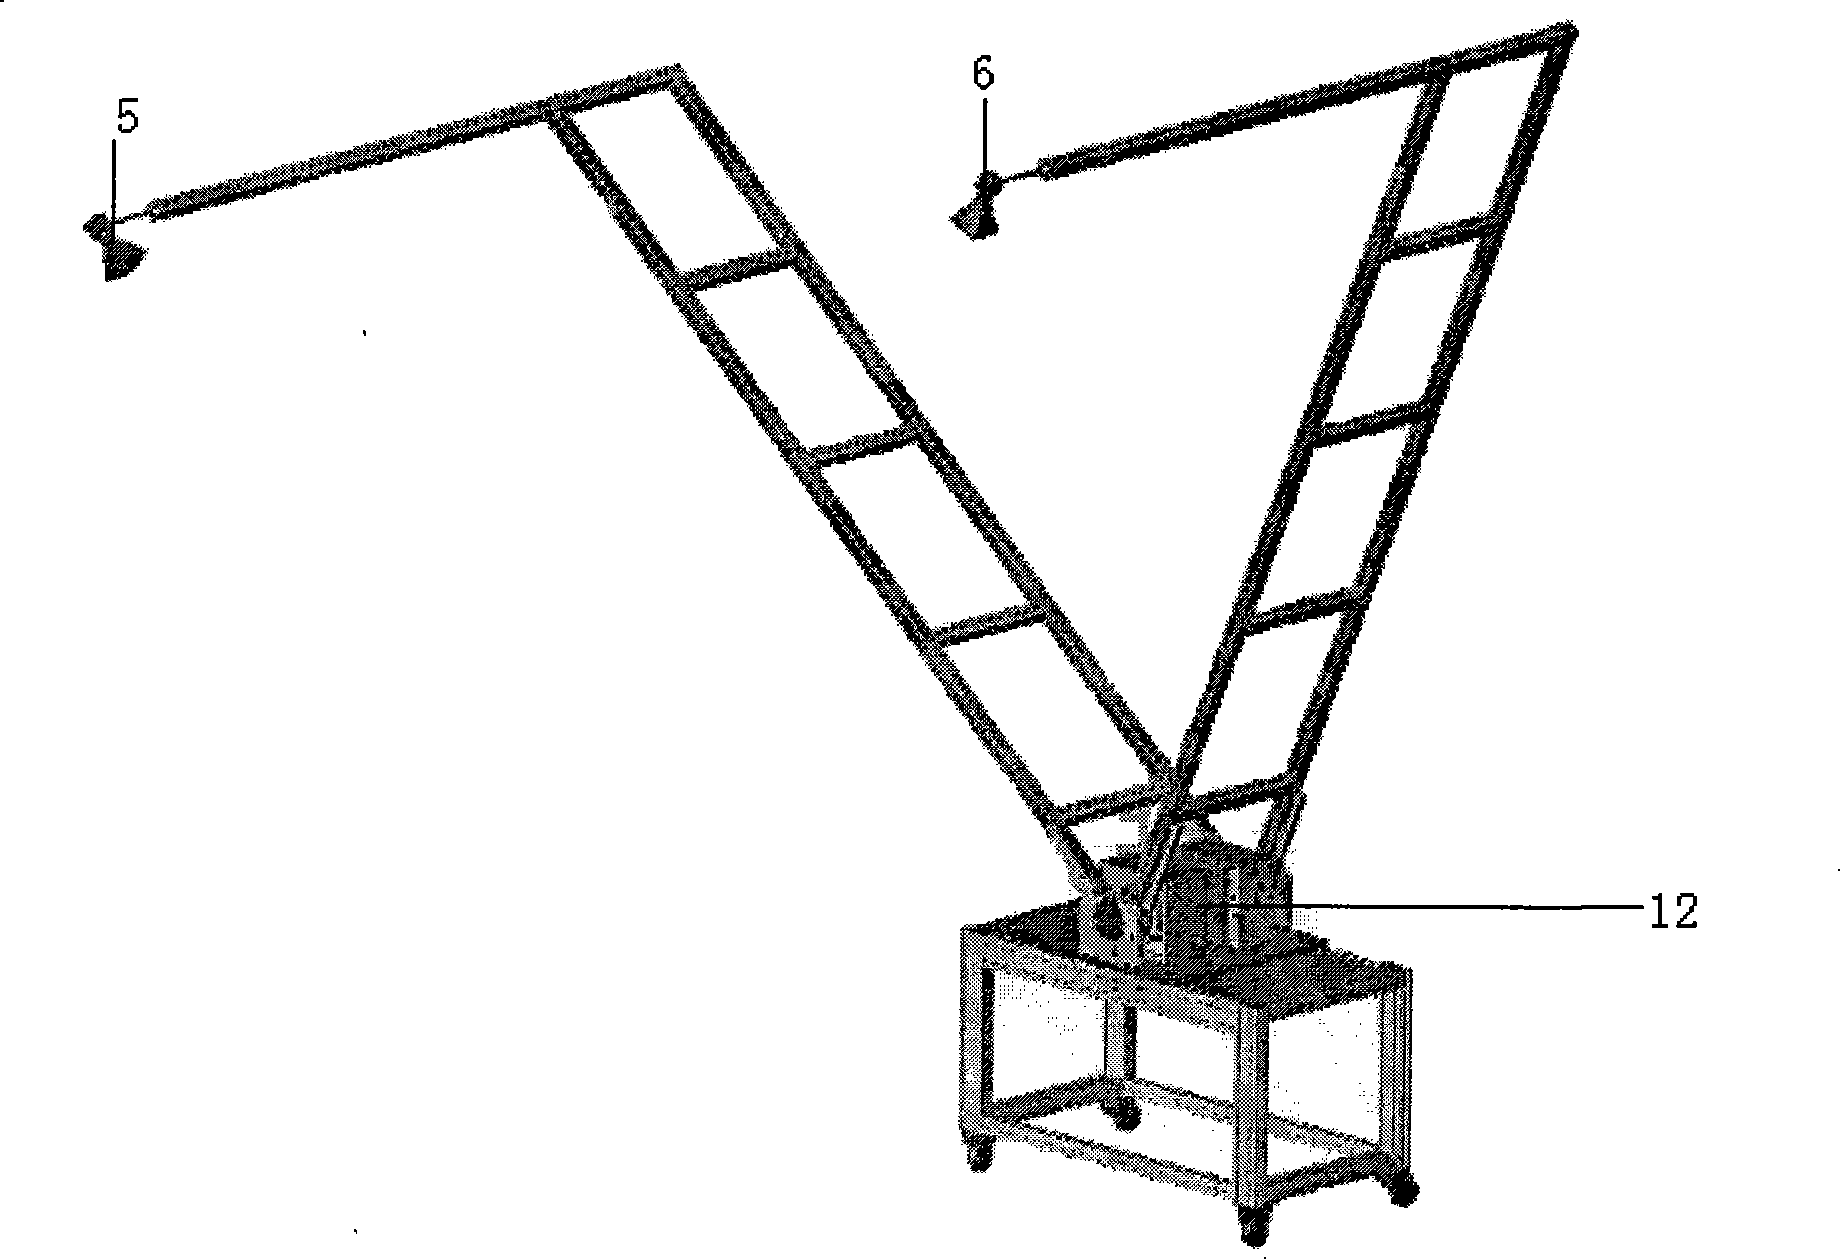 Measuring apparatus for reflection index of wave suction material